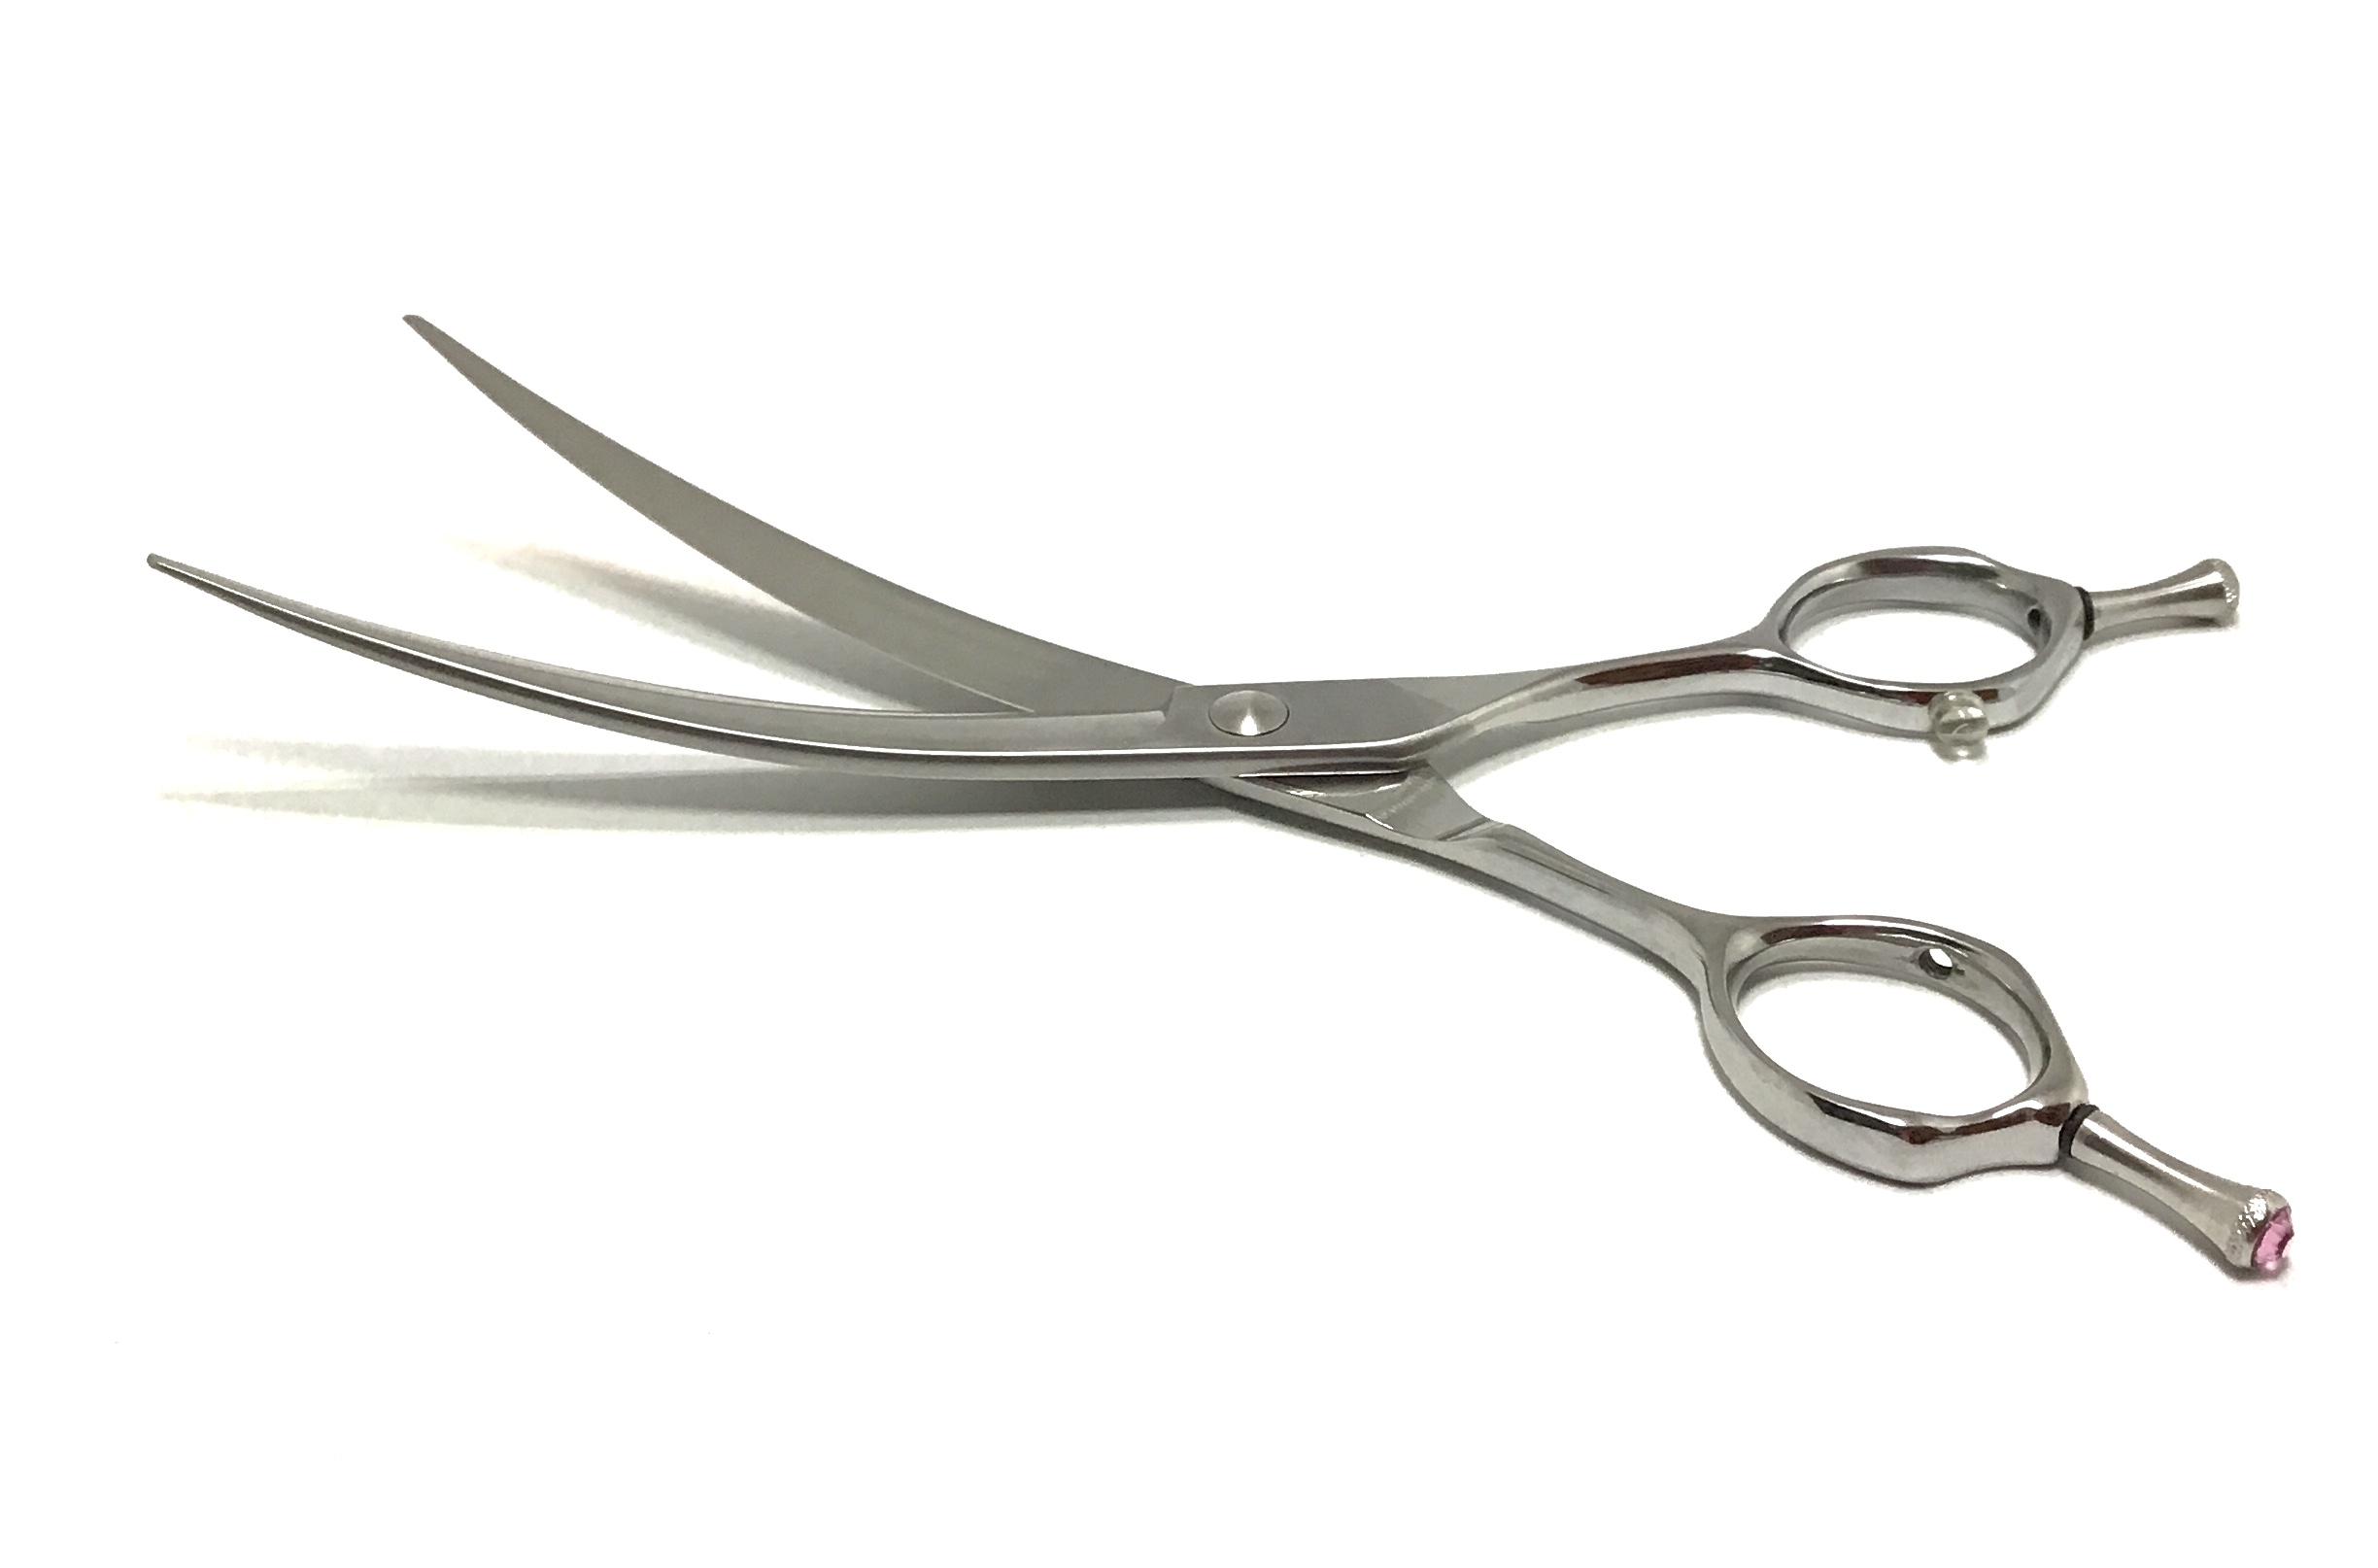 AOA Curved Grooming Beauty Scissors